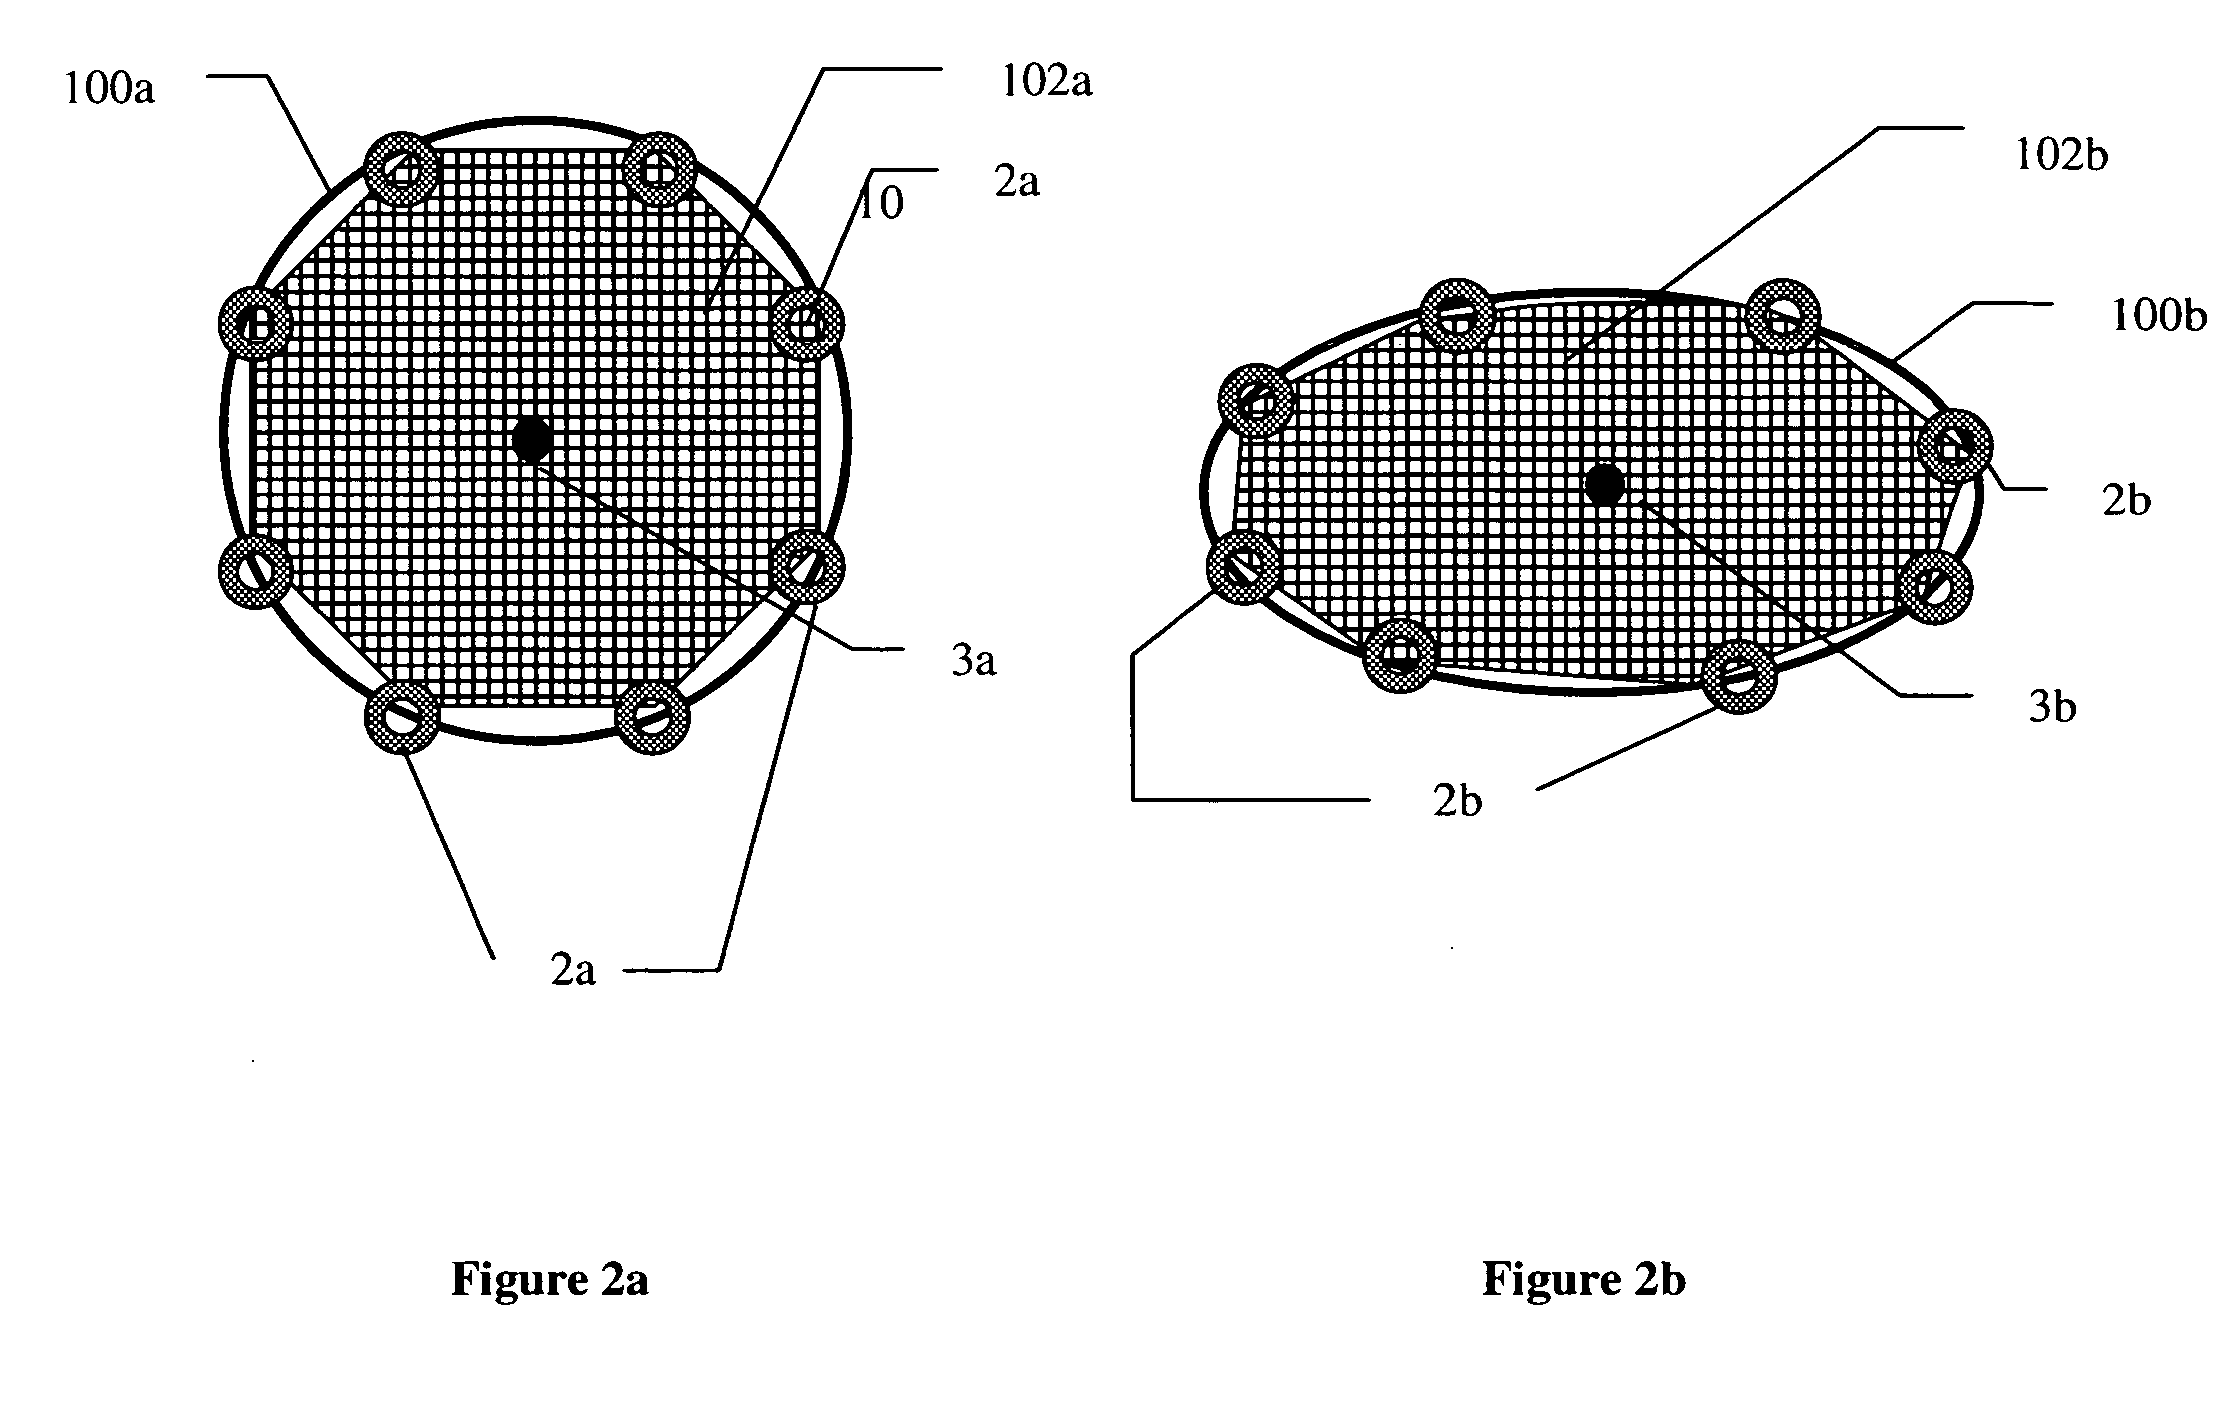 Distal protection device with improved wall apposition